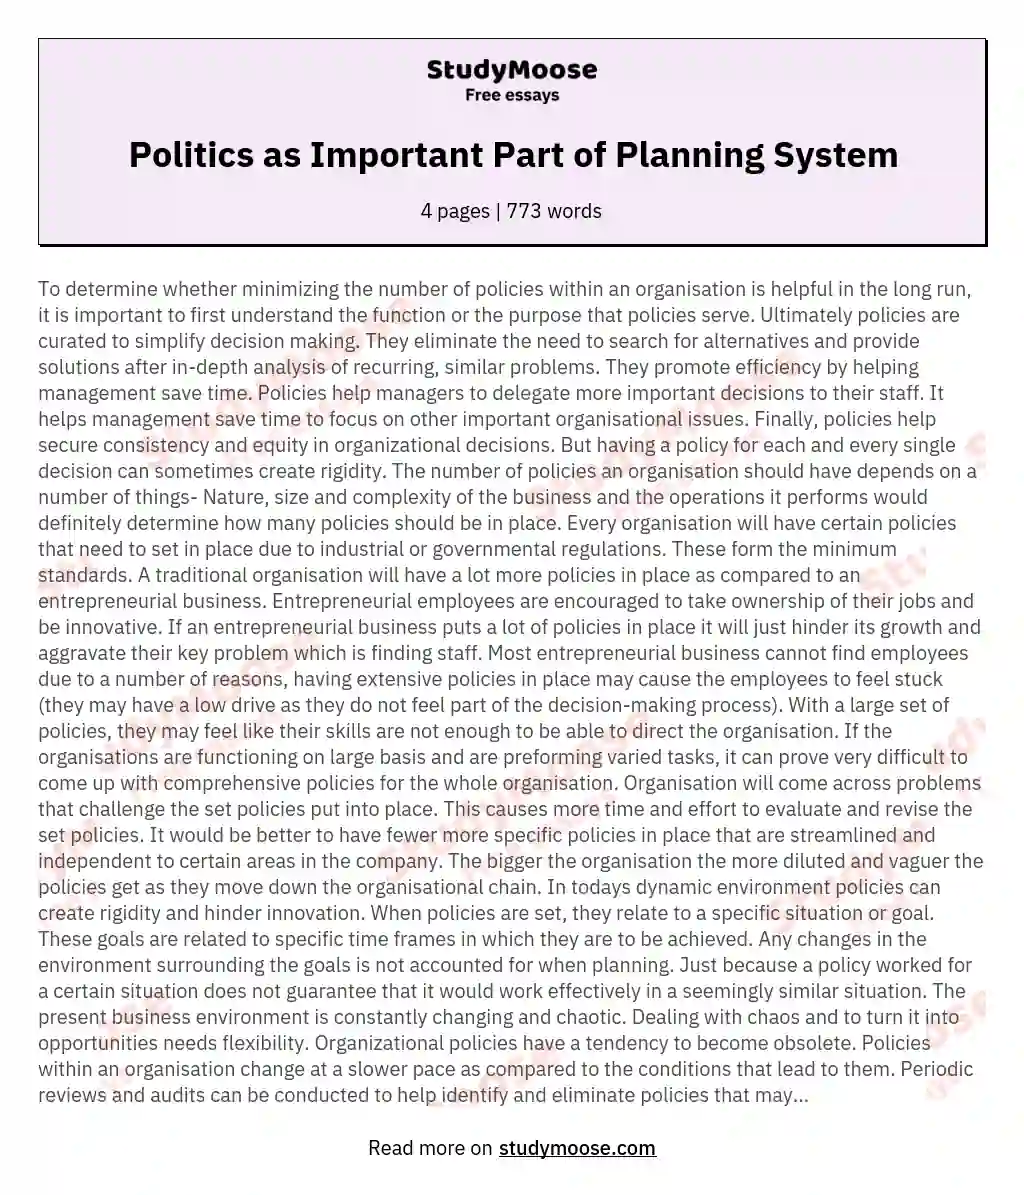 Politics as Important Part of Planning System essay